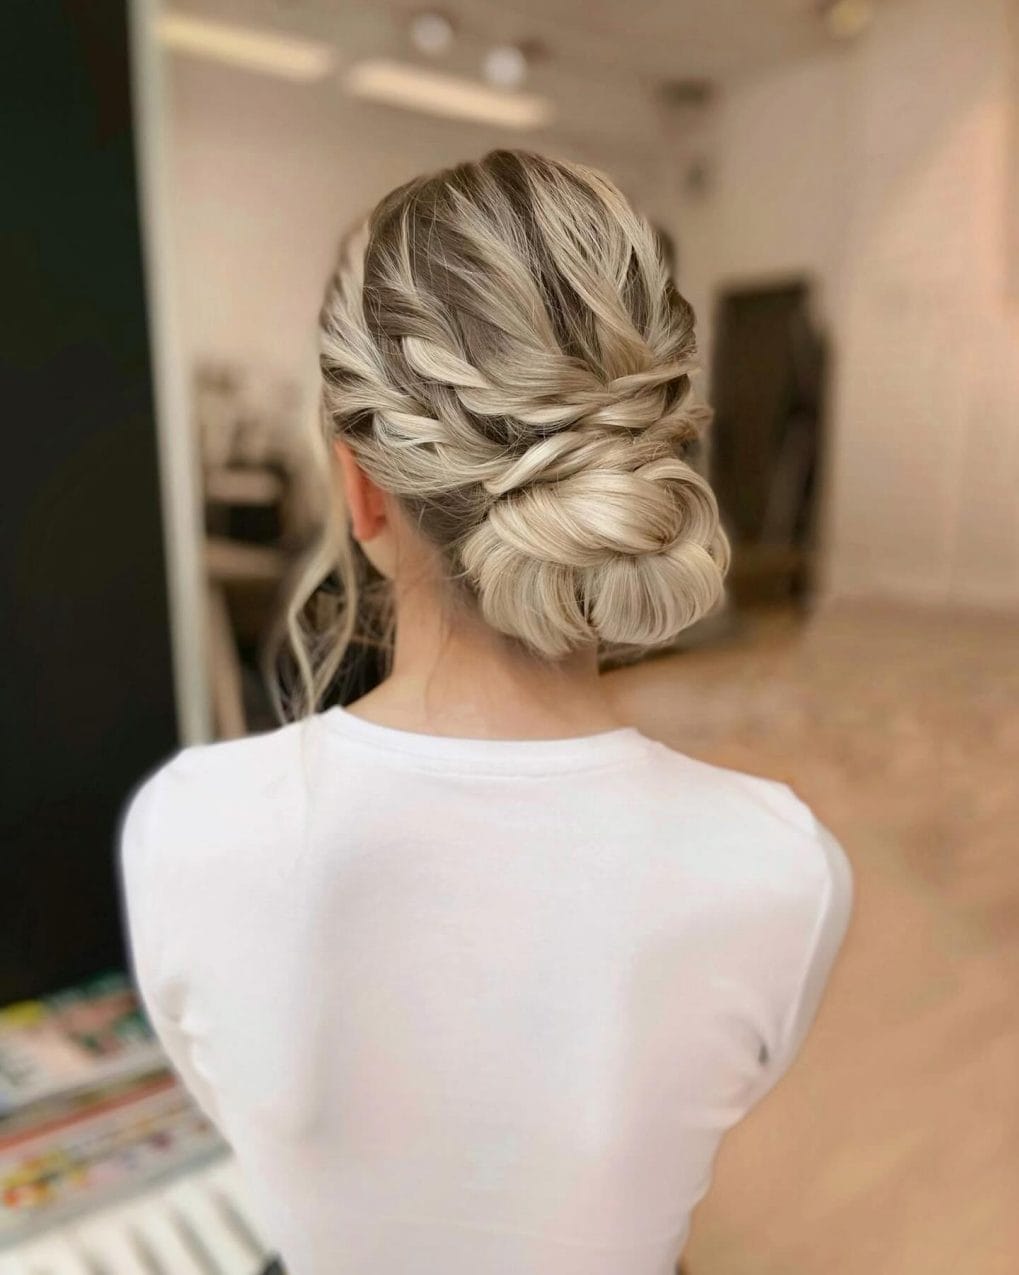 Sophisticated braided bun updo for hot summer days